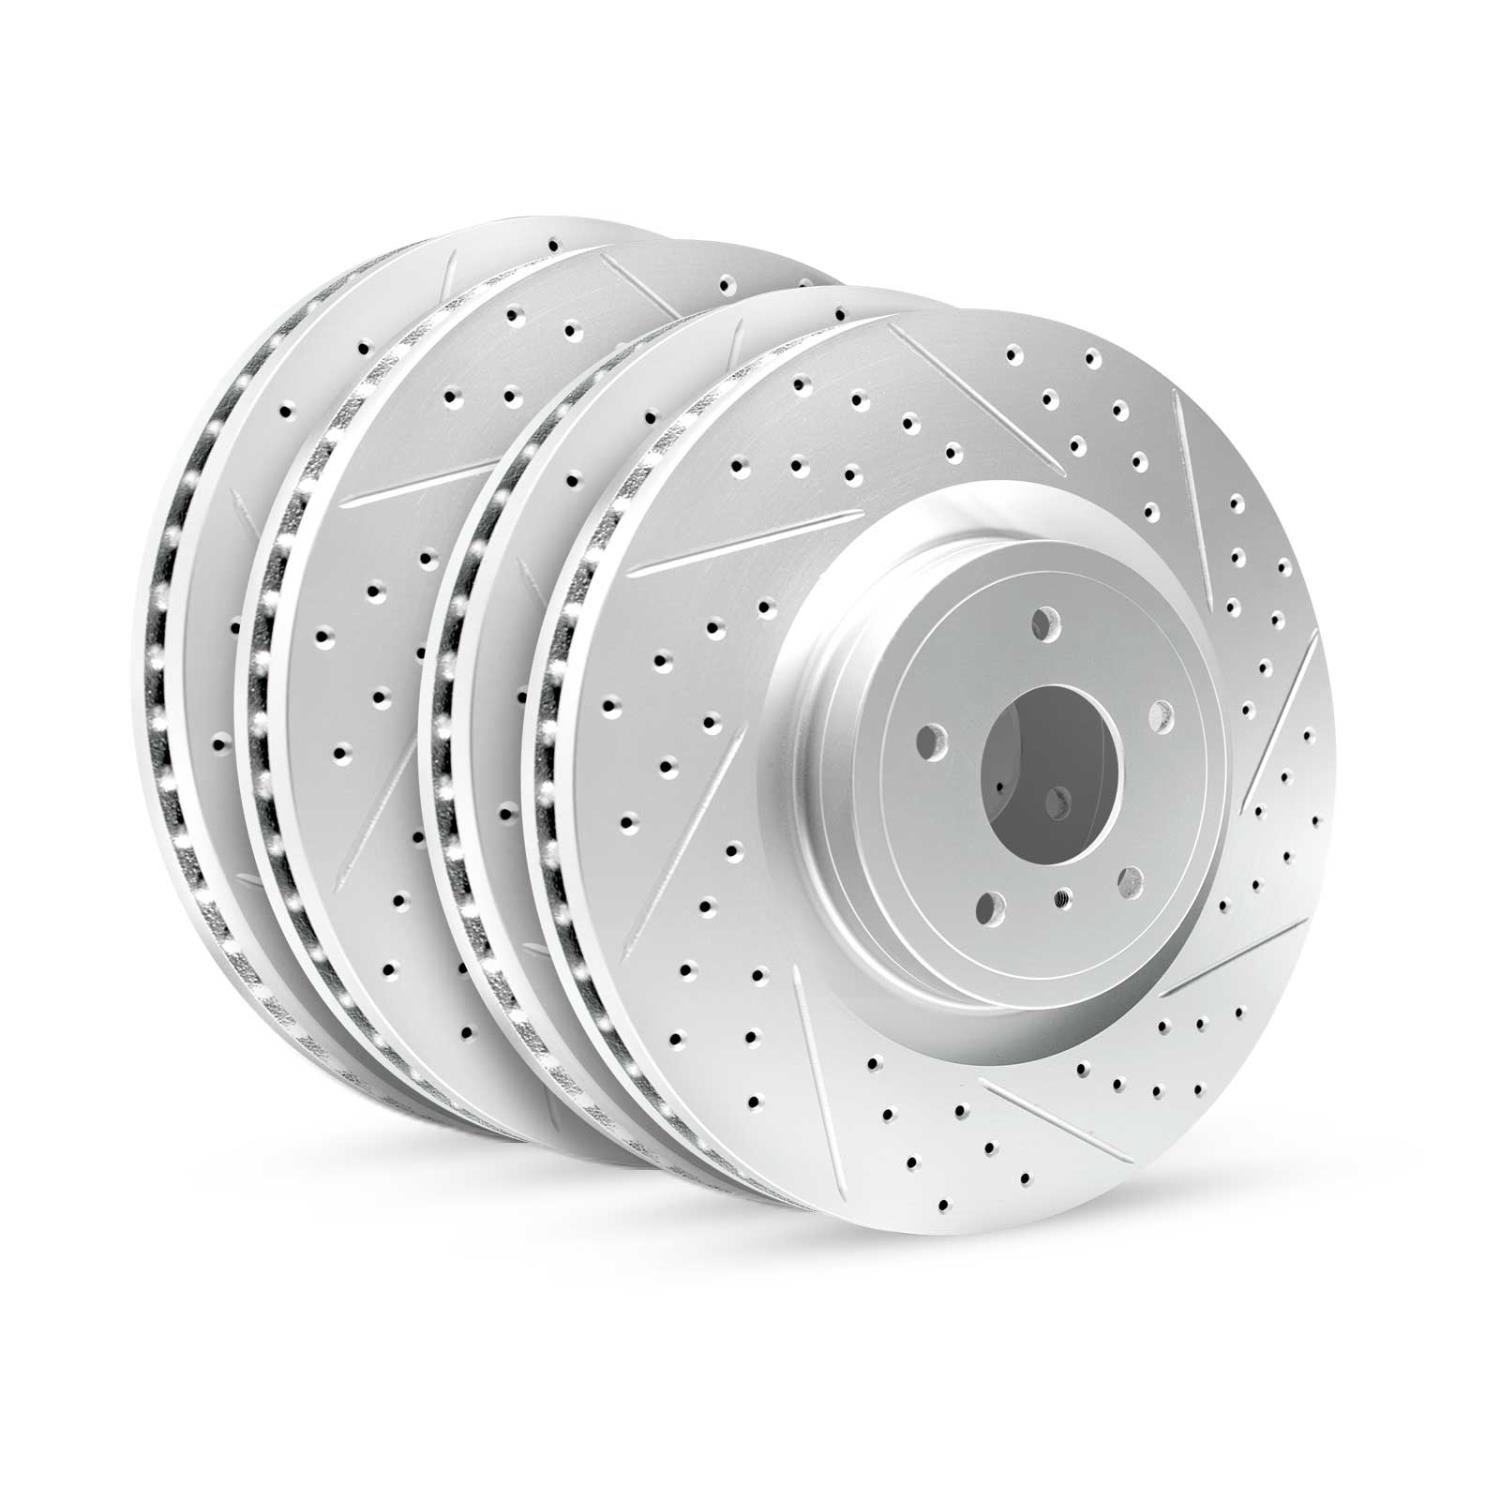 GEO-Carbon Drilled/Slotted Rotors, 2007-2015 Infiniti/Nissan, Position: Front/Rear